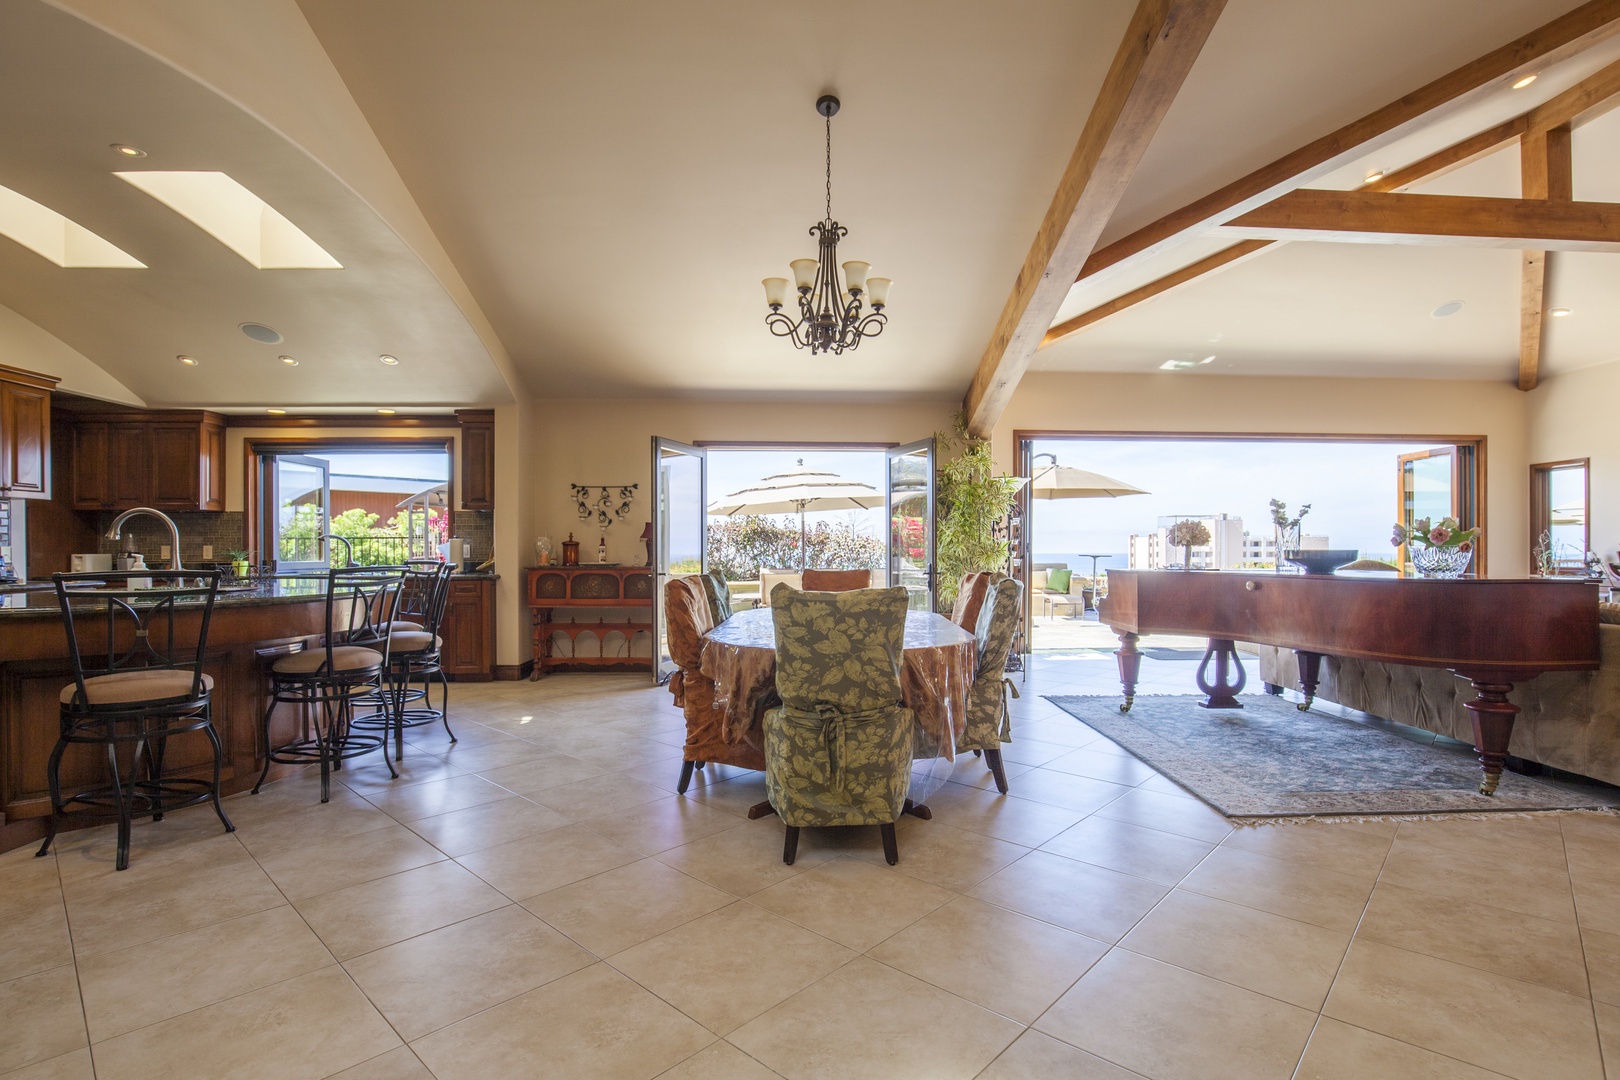 La Jolla Vacation Rentals, Jewel Above La Jolla Shores - There?s ample space in the great room between areas